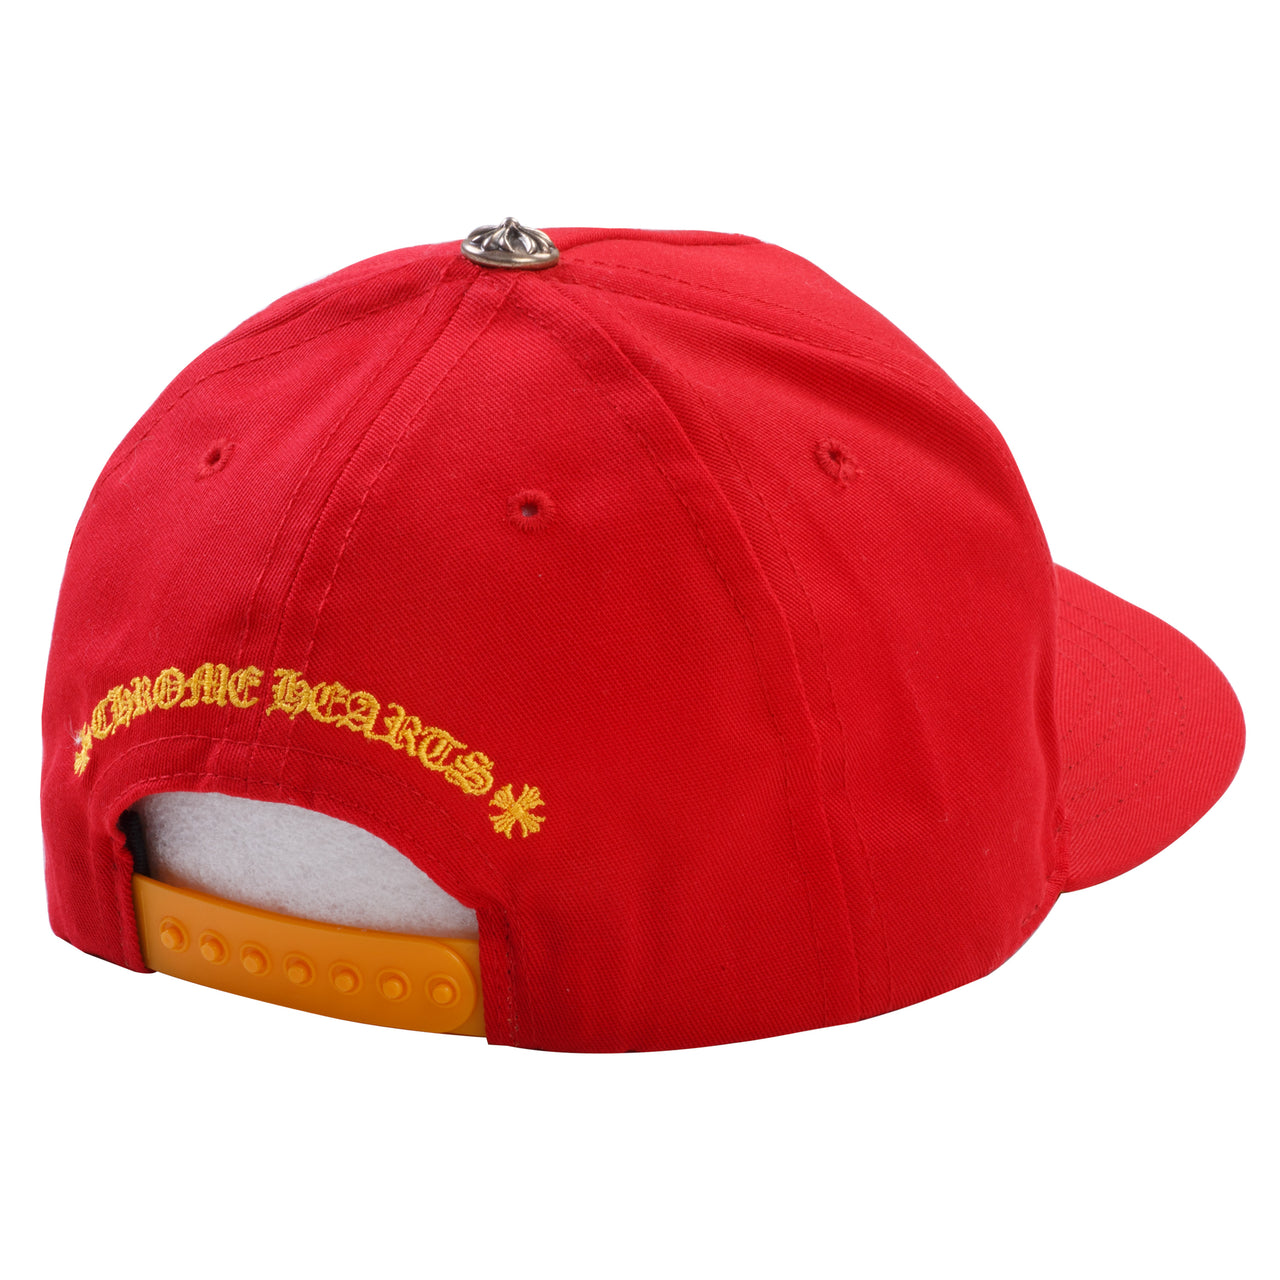 Chrome Hearts Baseball Hat Red Gold